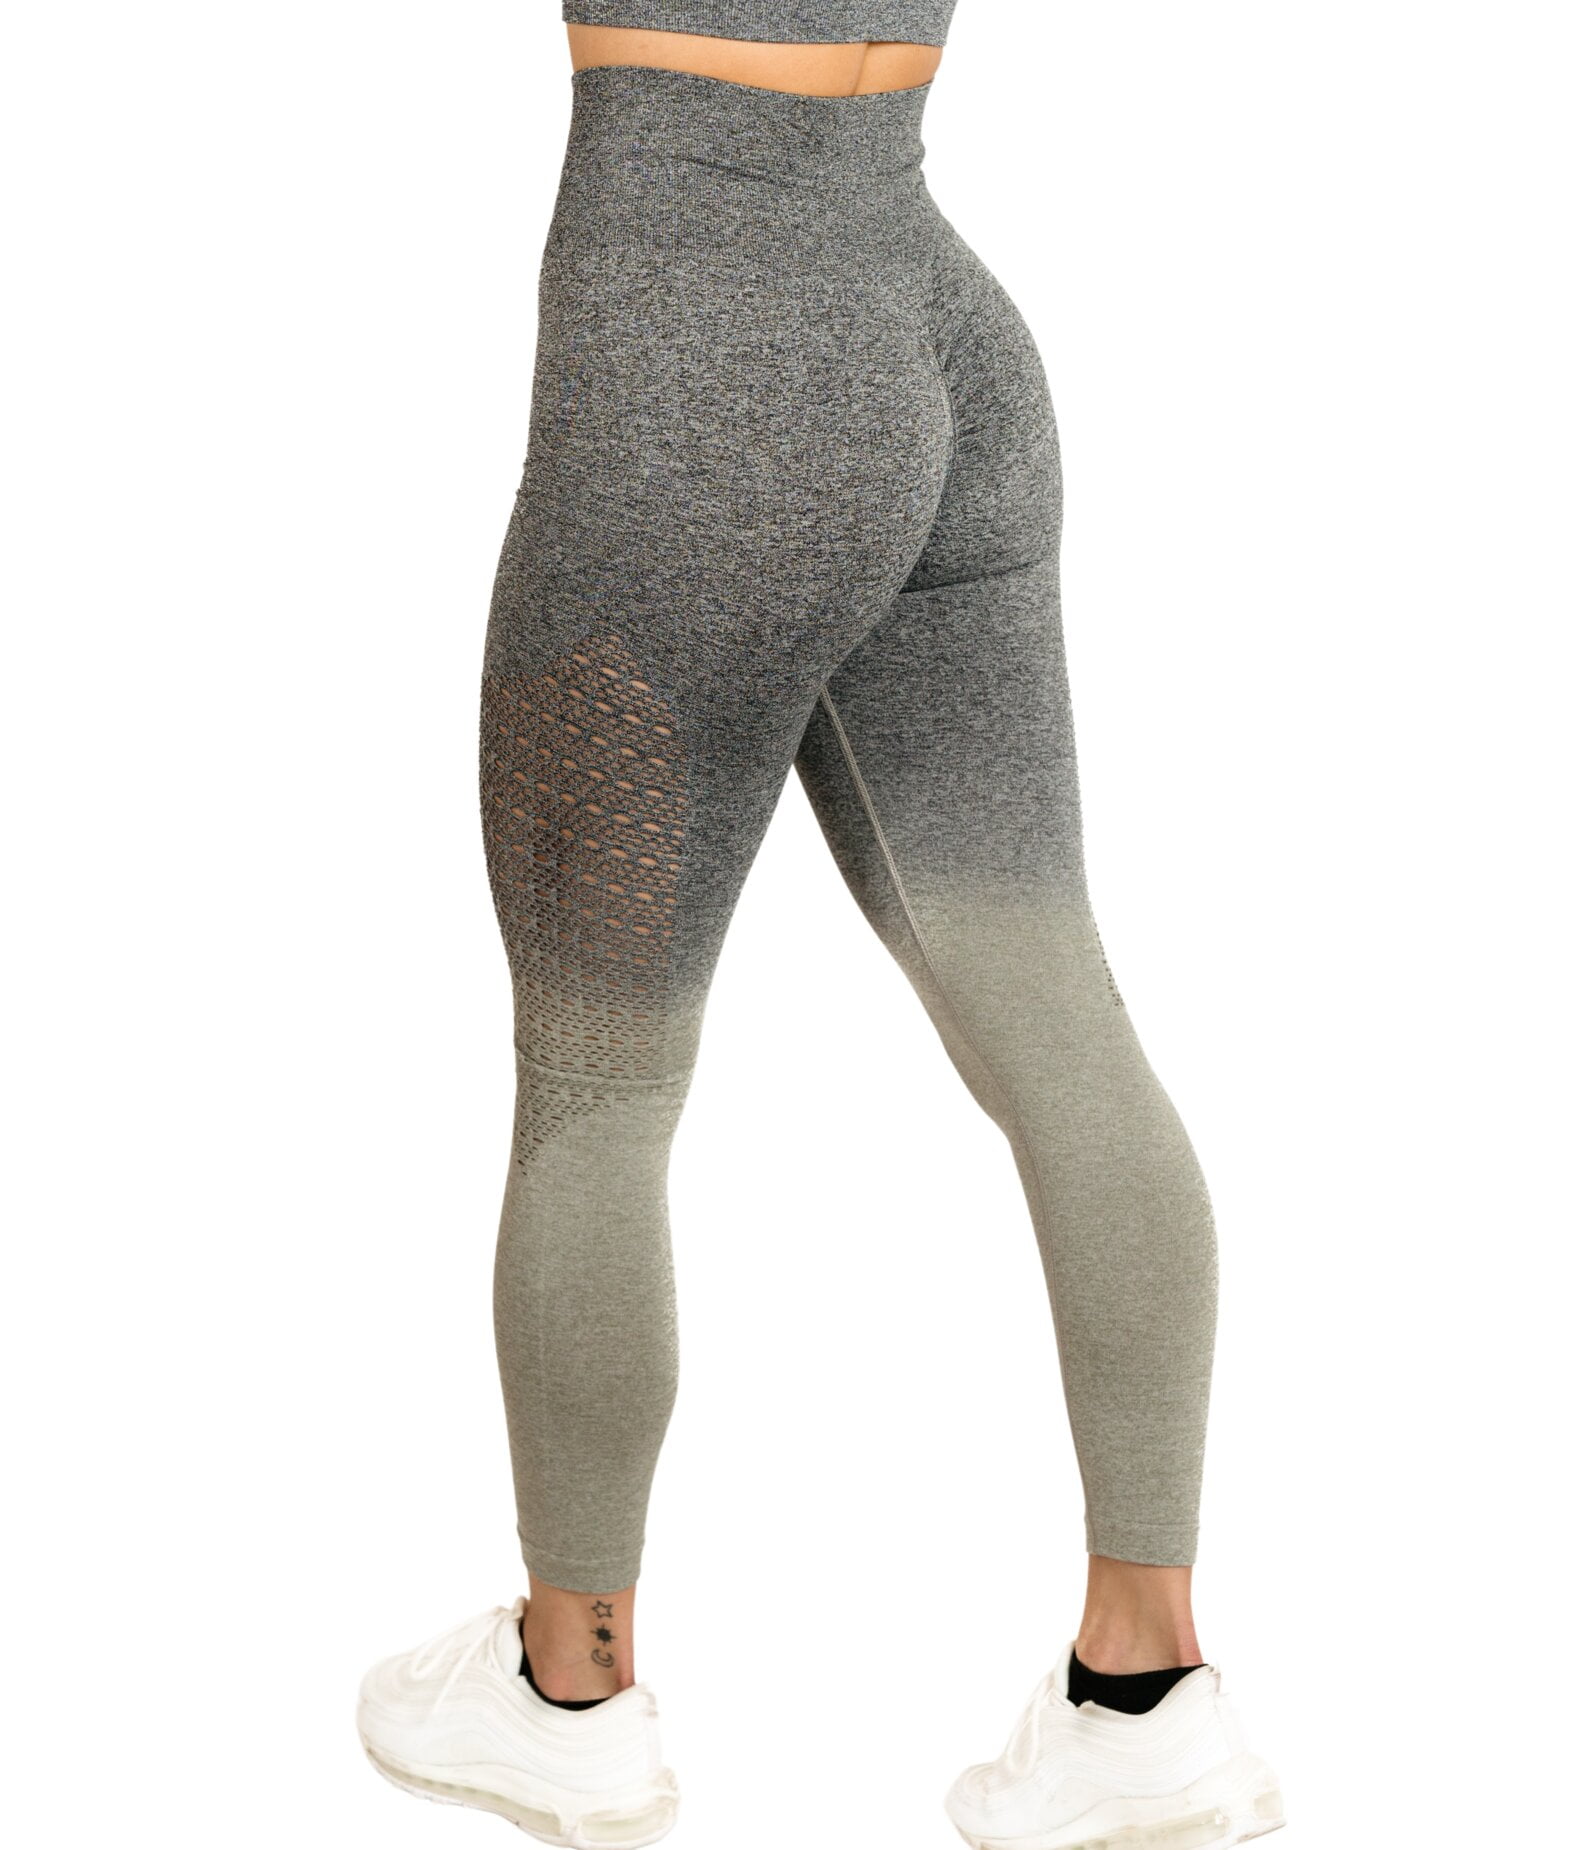 Womens High Waisted Leggings Butt Lifting Seamless Ombre for Gym Workout  Yoga Running by MAXXIM Charcoal Heather Gray X-Large